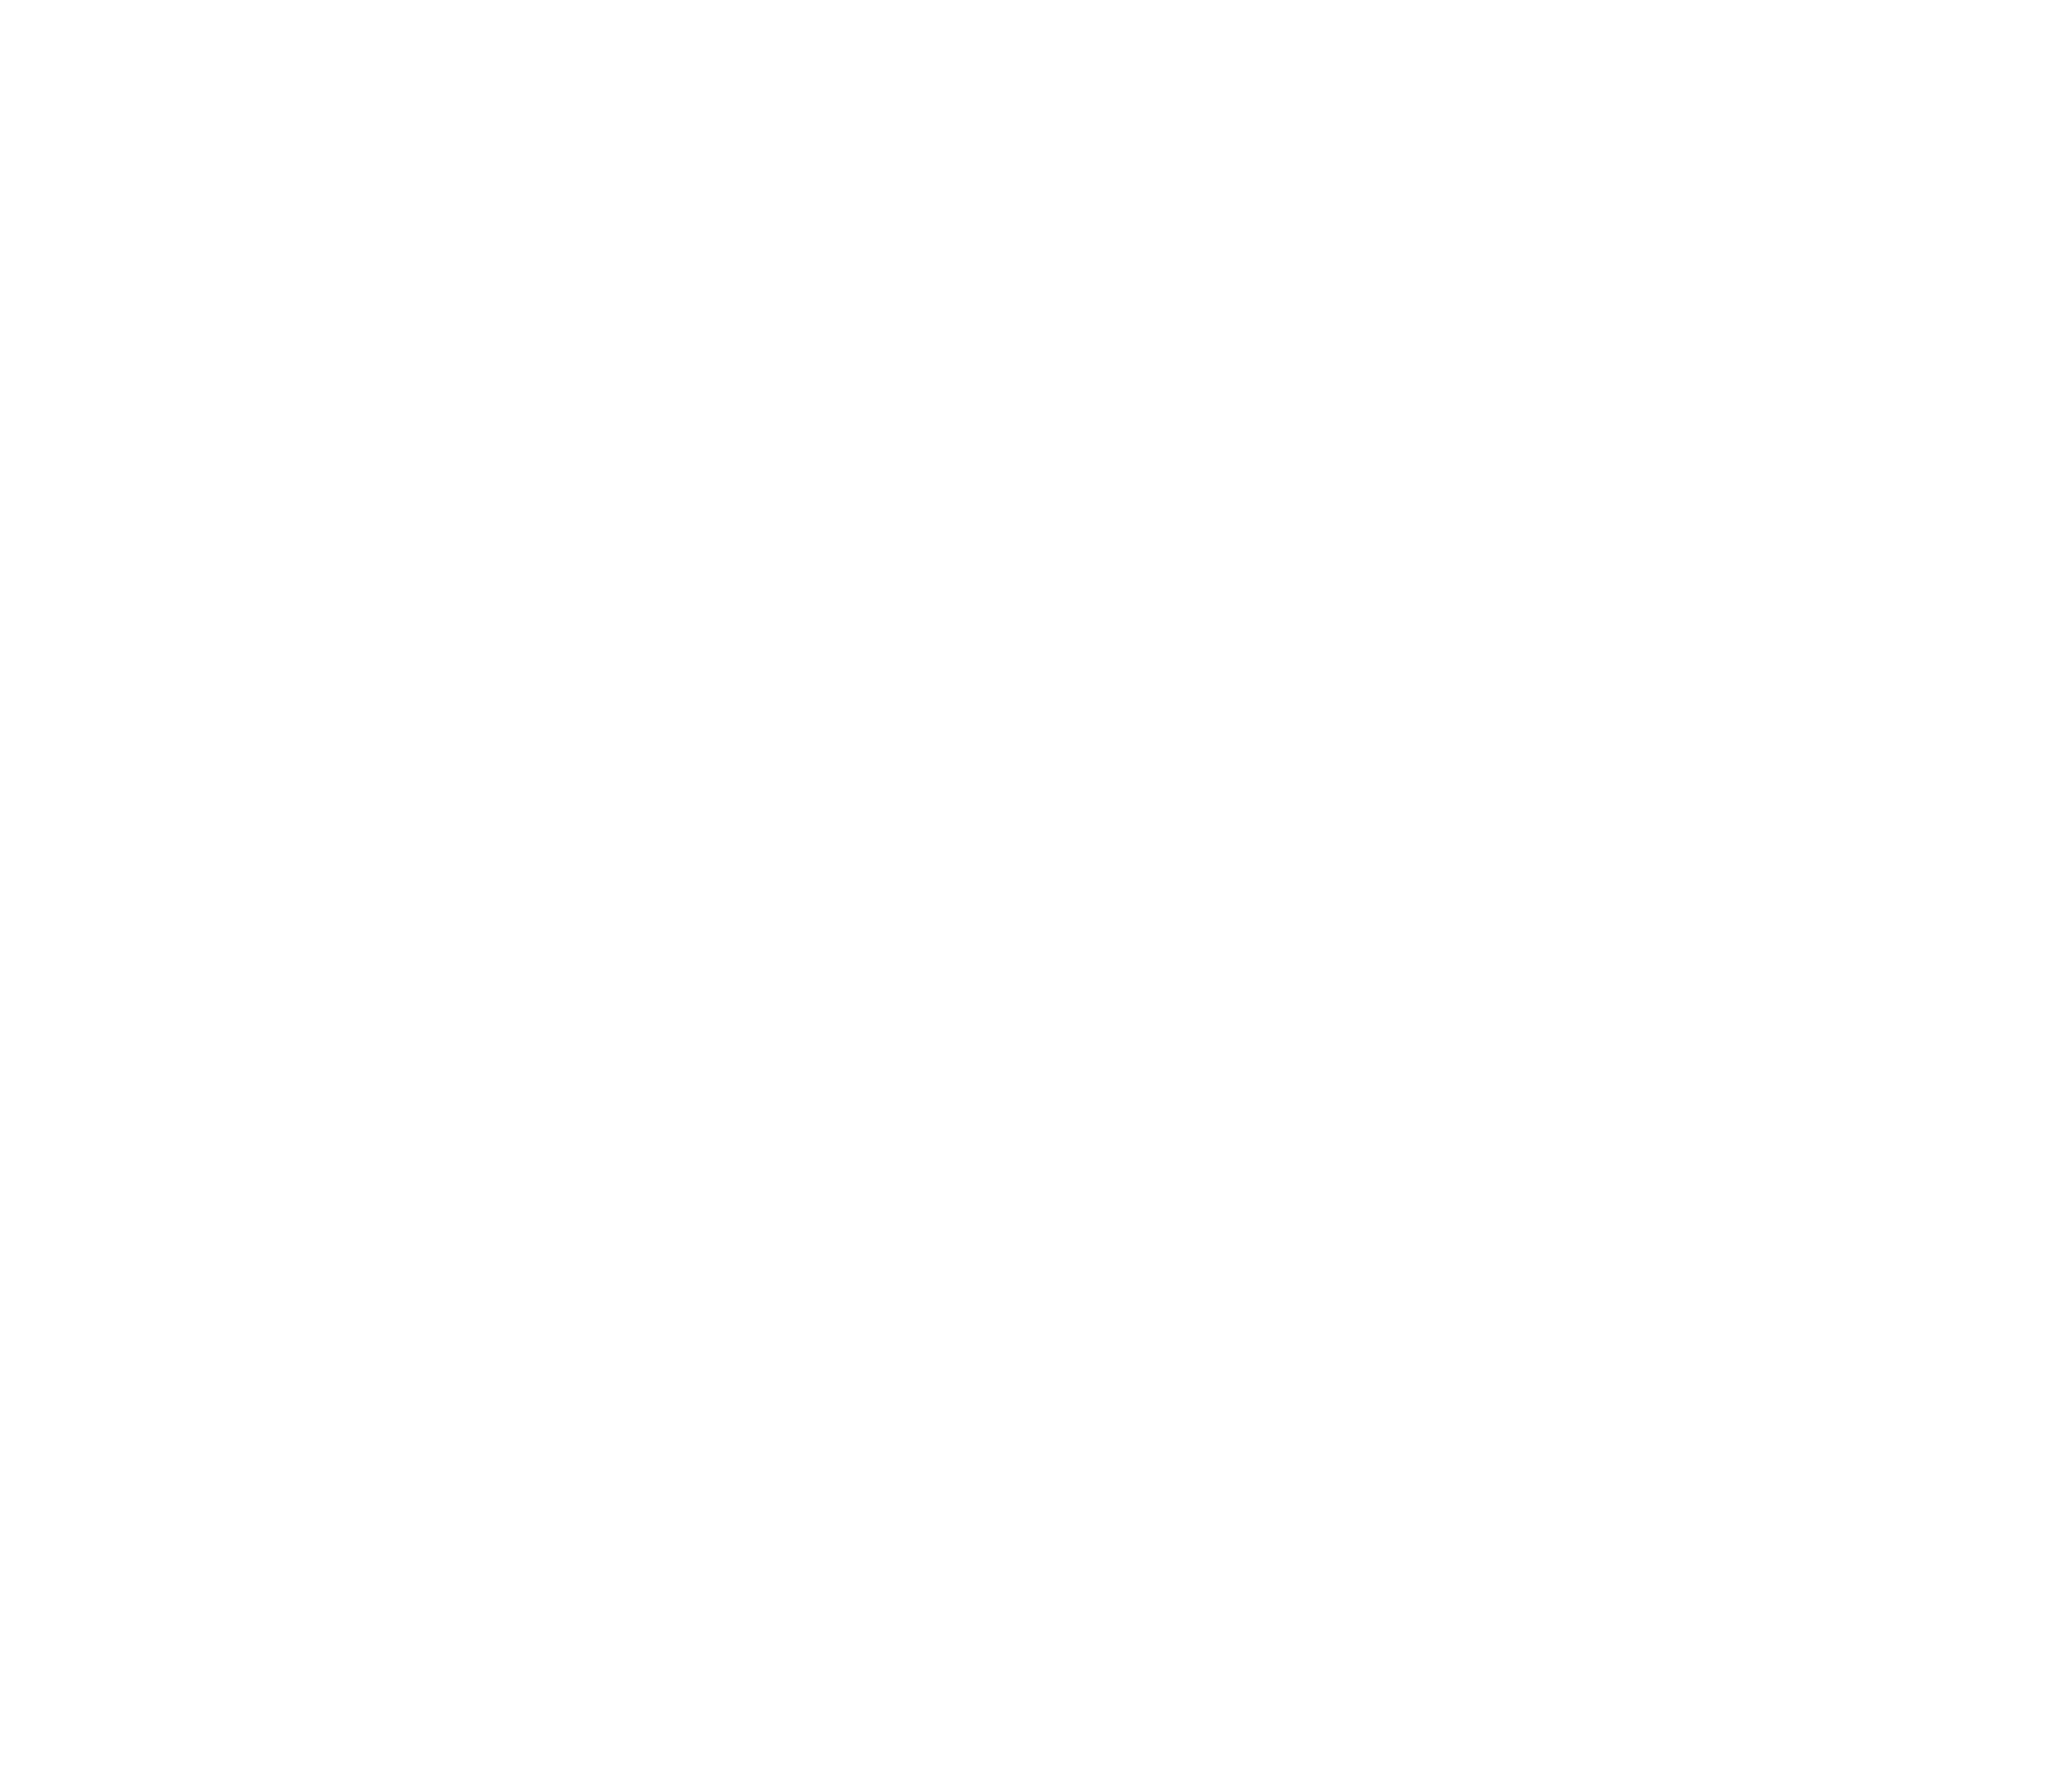 Pennapps XII